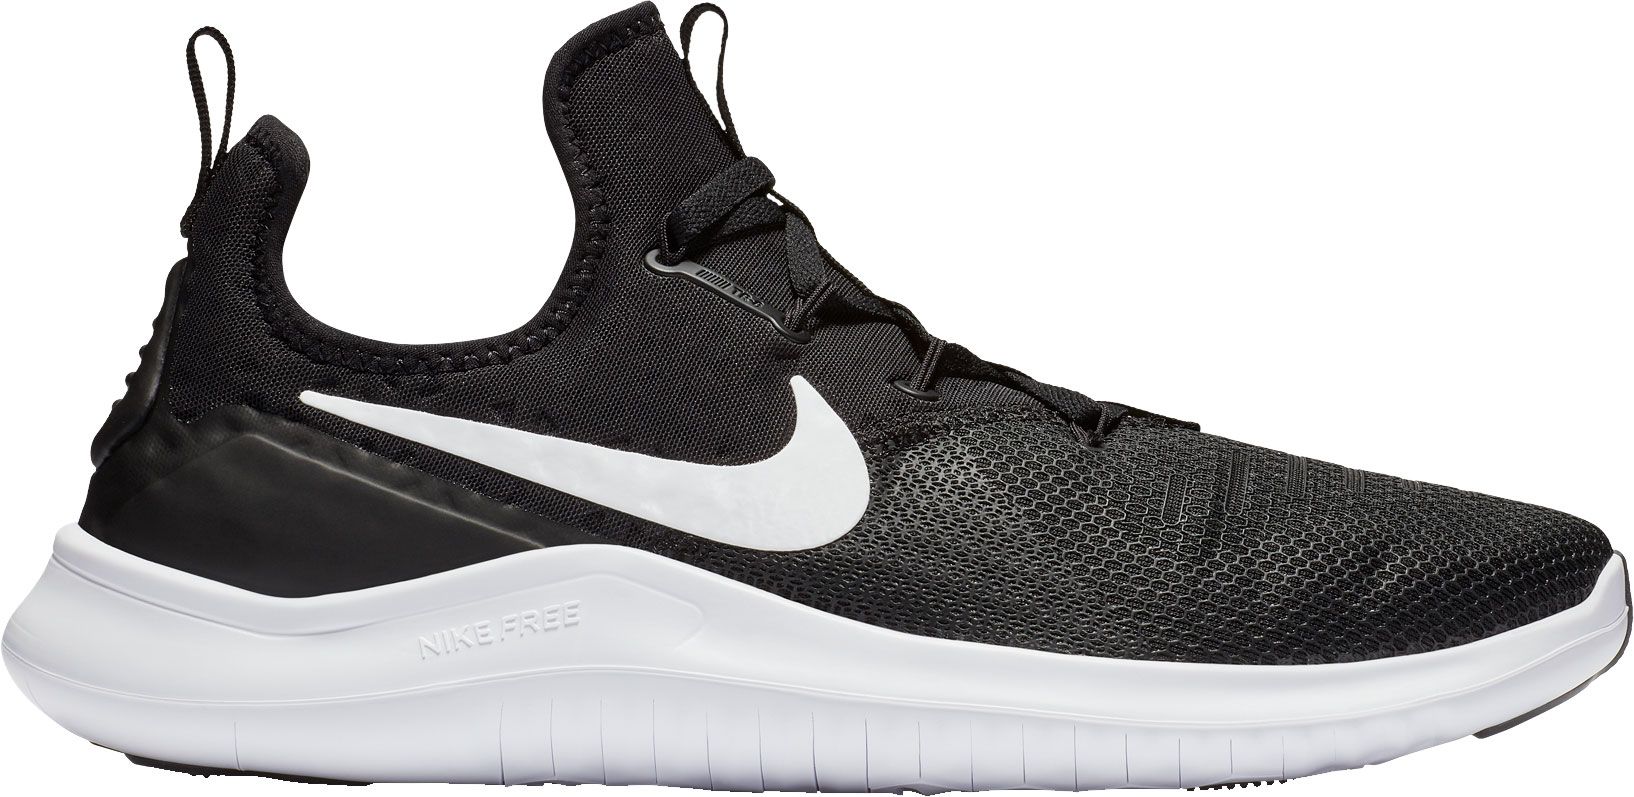 Nike Men's Free TR8 Training Shoes | DICK'S Sporting Goods